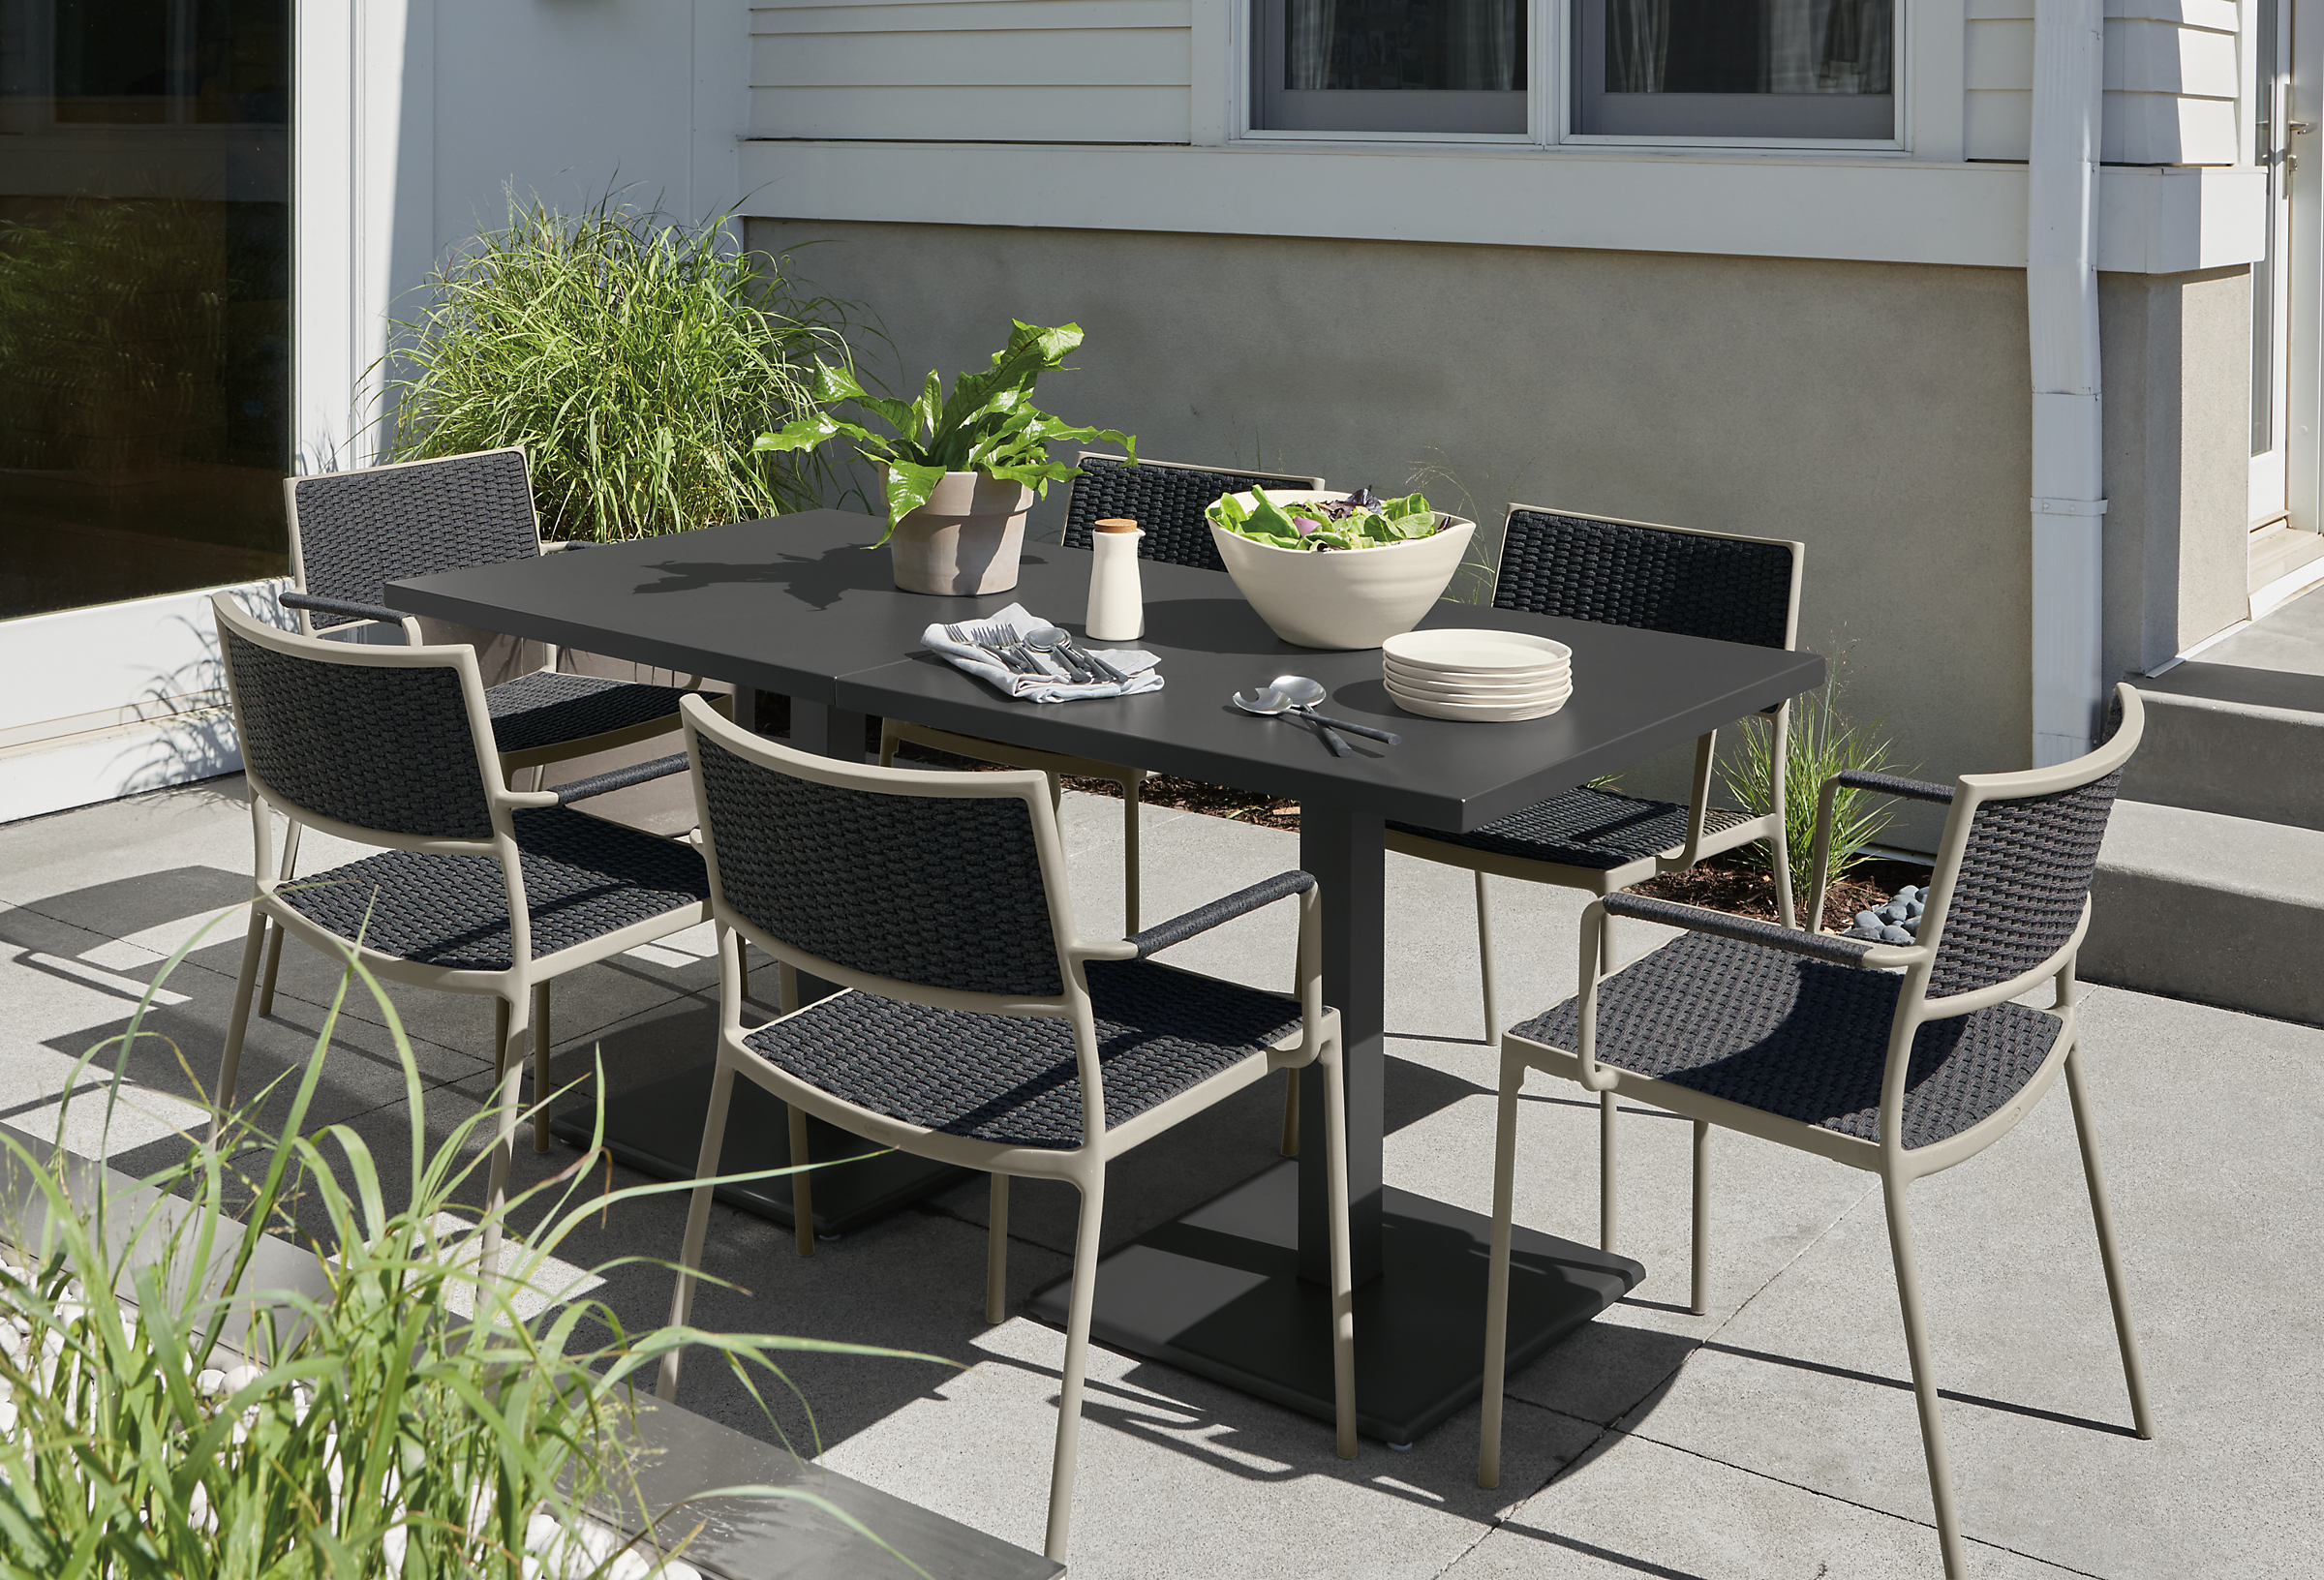 Two Maris 32-square outdoor tables in graphite with Plat chairs in Slate with taupe frame.